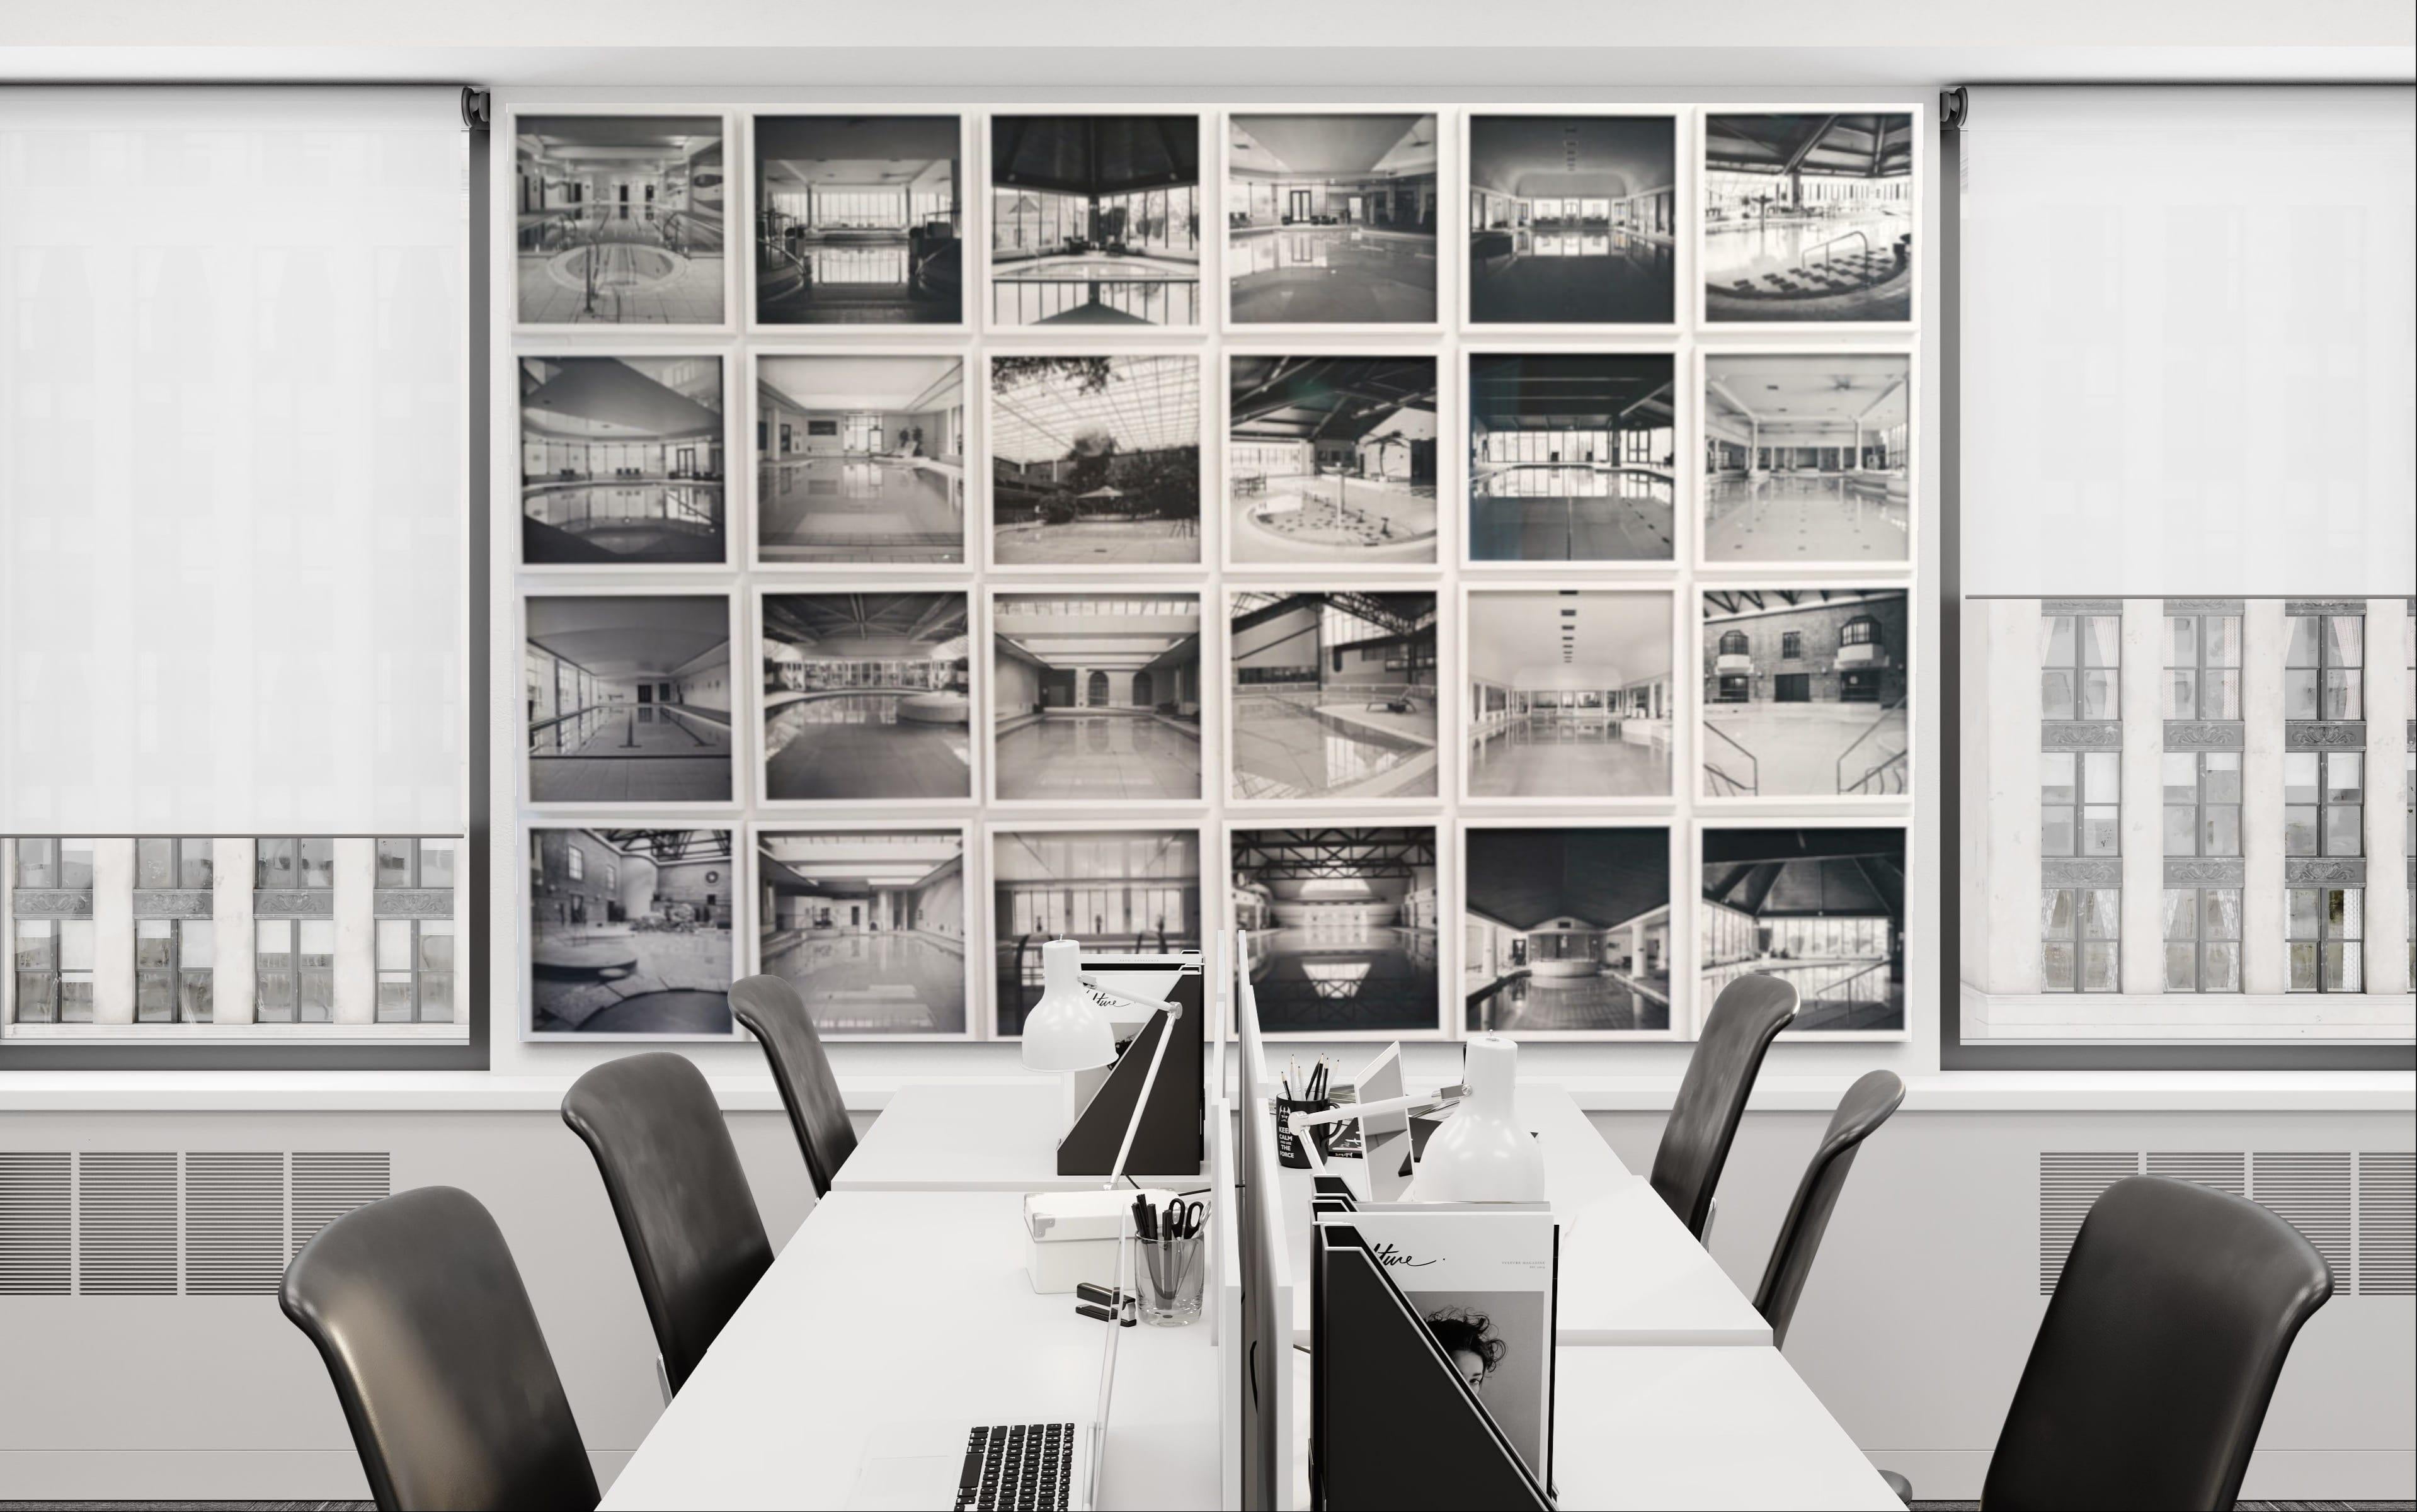 Large panel of black and white architecture photos by Anna Dobrovolskaya-Mints. 1